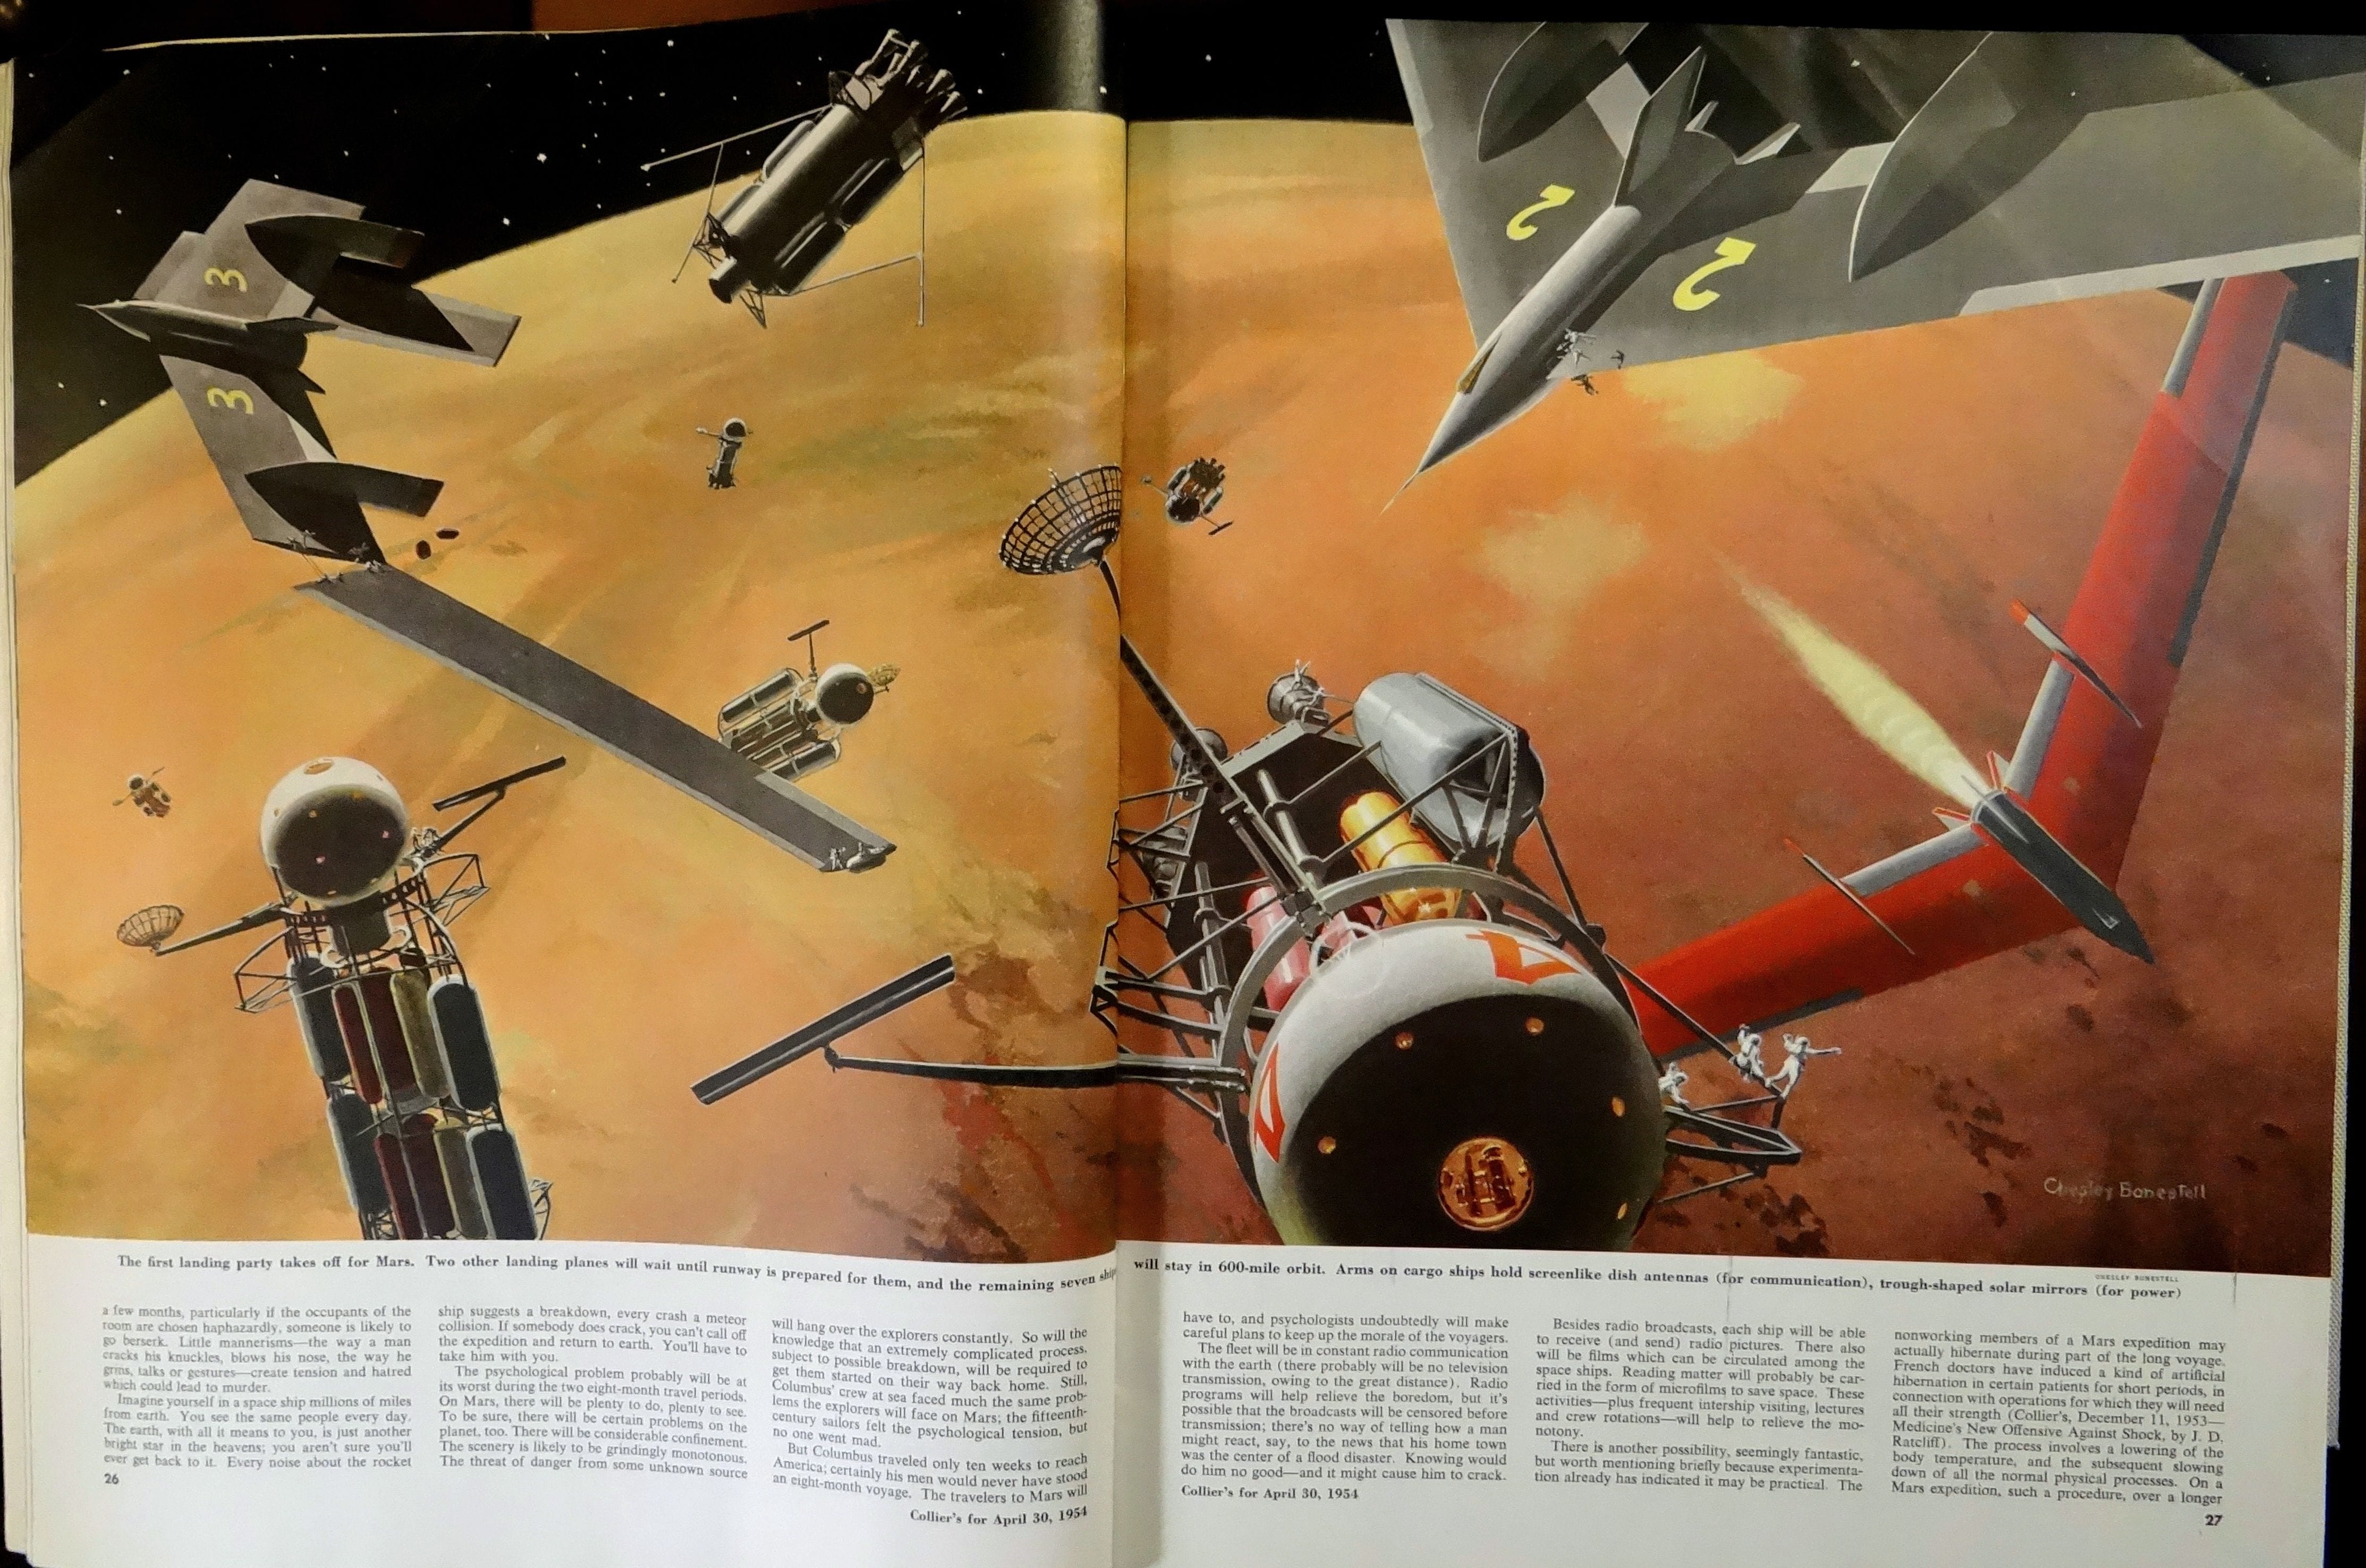 Collier's (April 30, 1954). Pages 26-27. Illustration by Chesley Bonestell